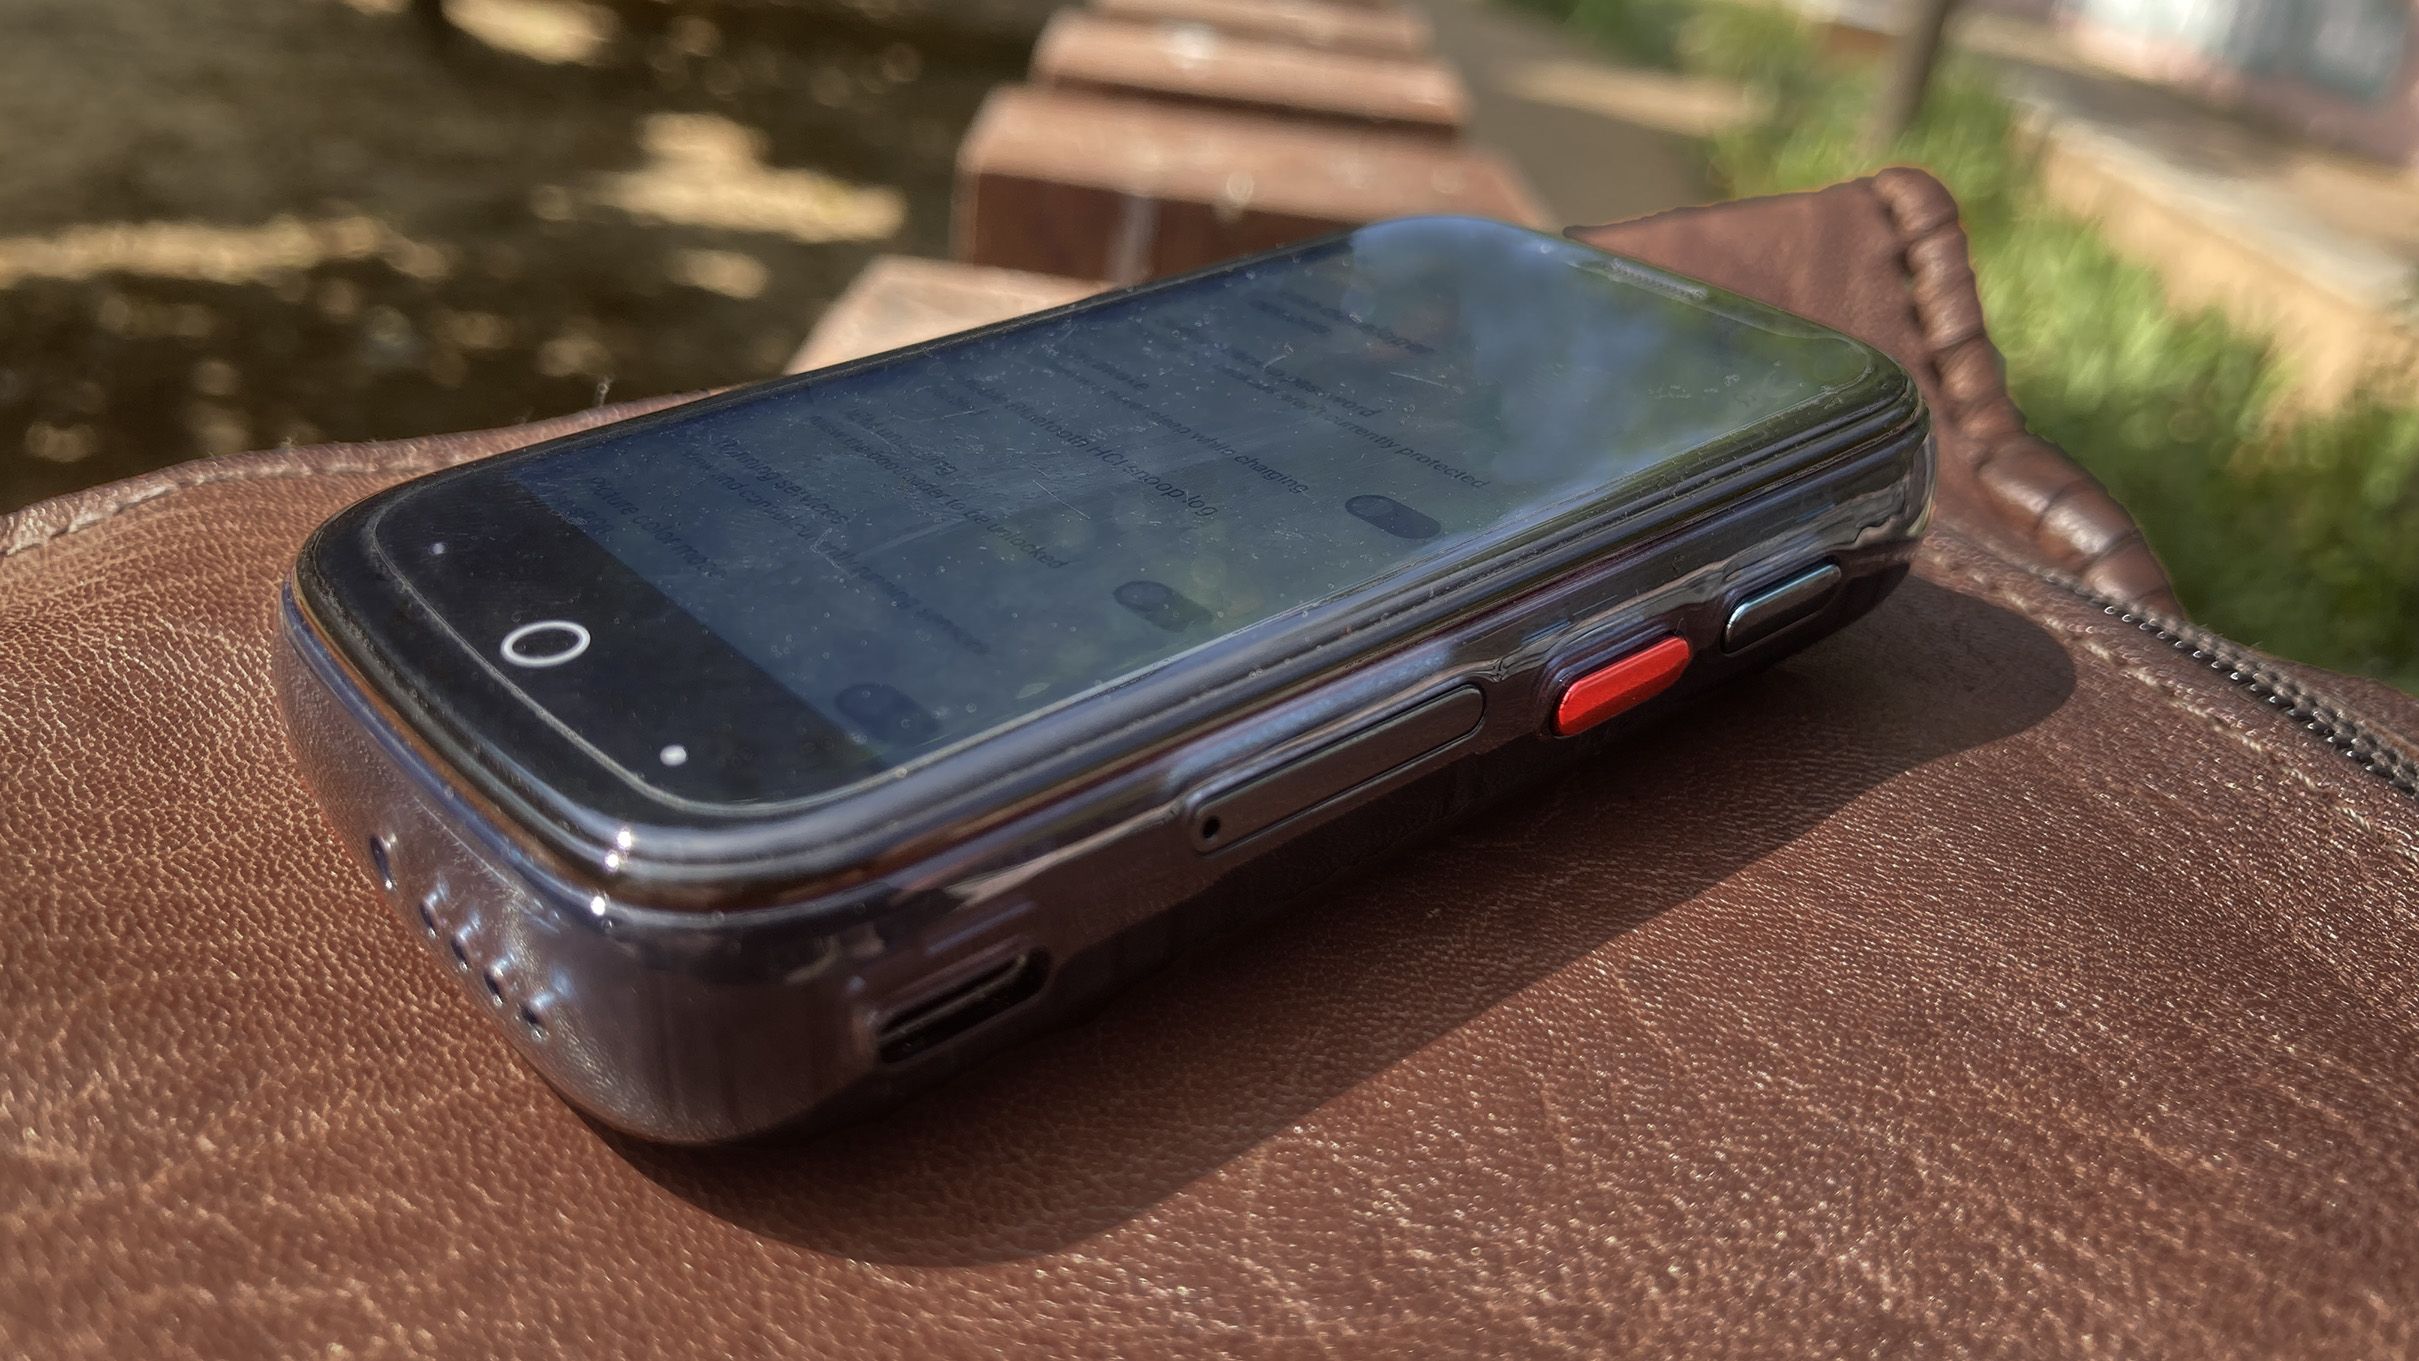 The Unihertz Jelly Star sitting flat on a leather pouch with as view of its buttons, SIM slot, USB port, and lower microphone port